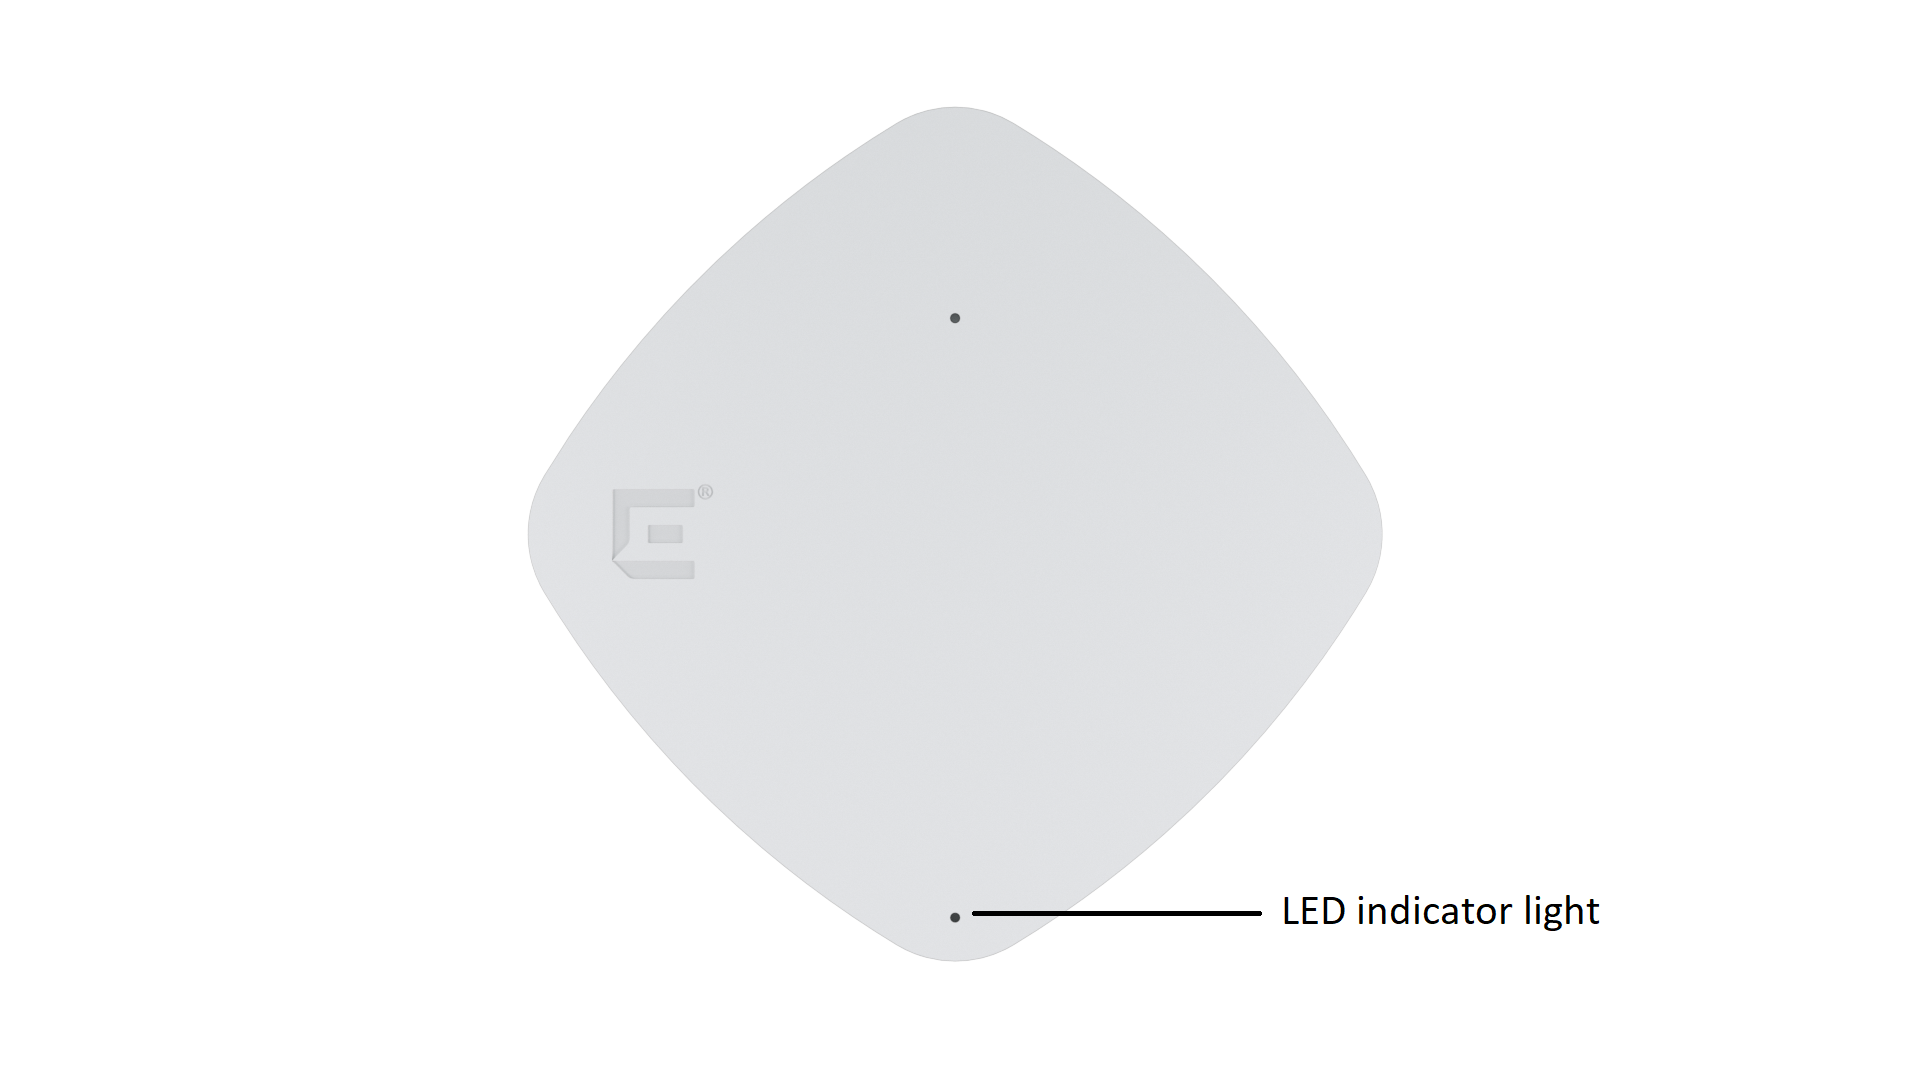 The AP3000 LED is located on the top of the access point, near the Extreme logo.